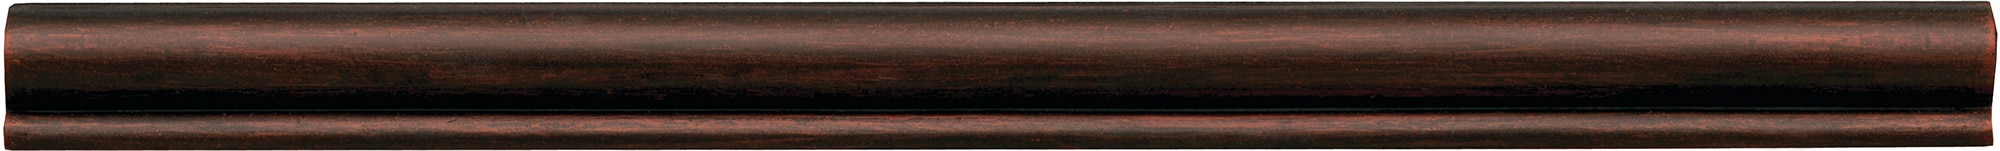 Guilded Copper, Ogee, 1X12, Satin